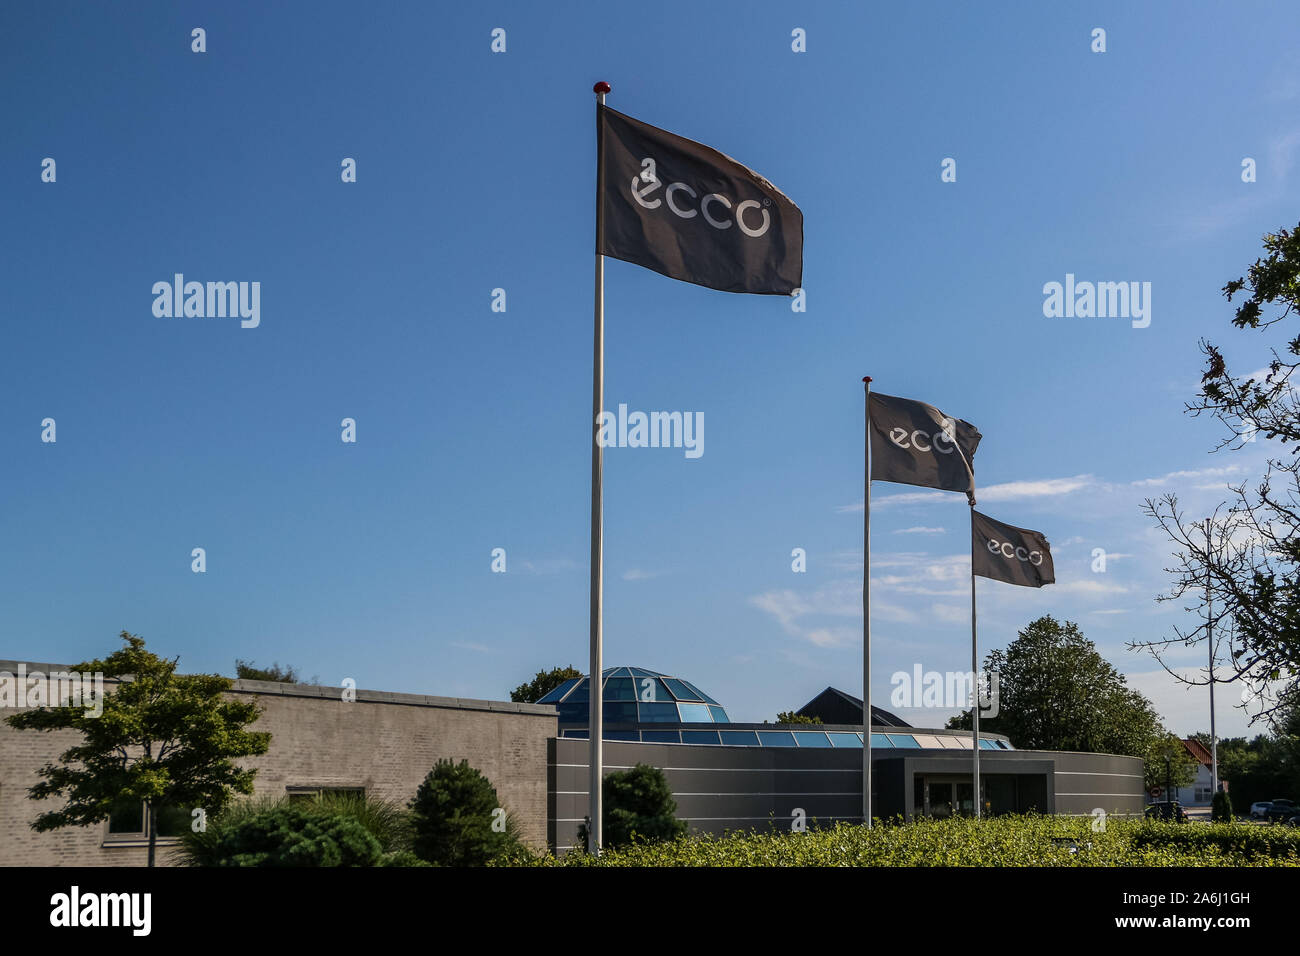 ECCO Sko a Danish shoe manufacturer and retailer head office is seen in Bredebro, Denmark on 26 July 2019 ECCOÕs products are sold in 99 countries from over 2,250 ECCO shops